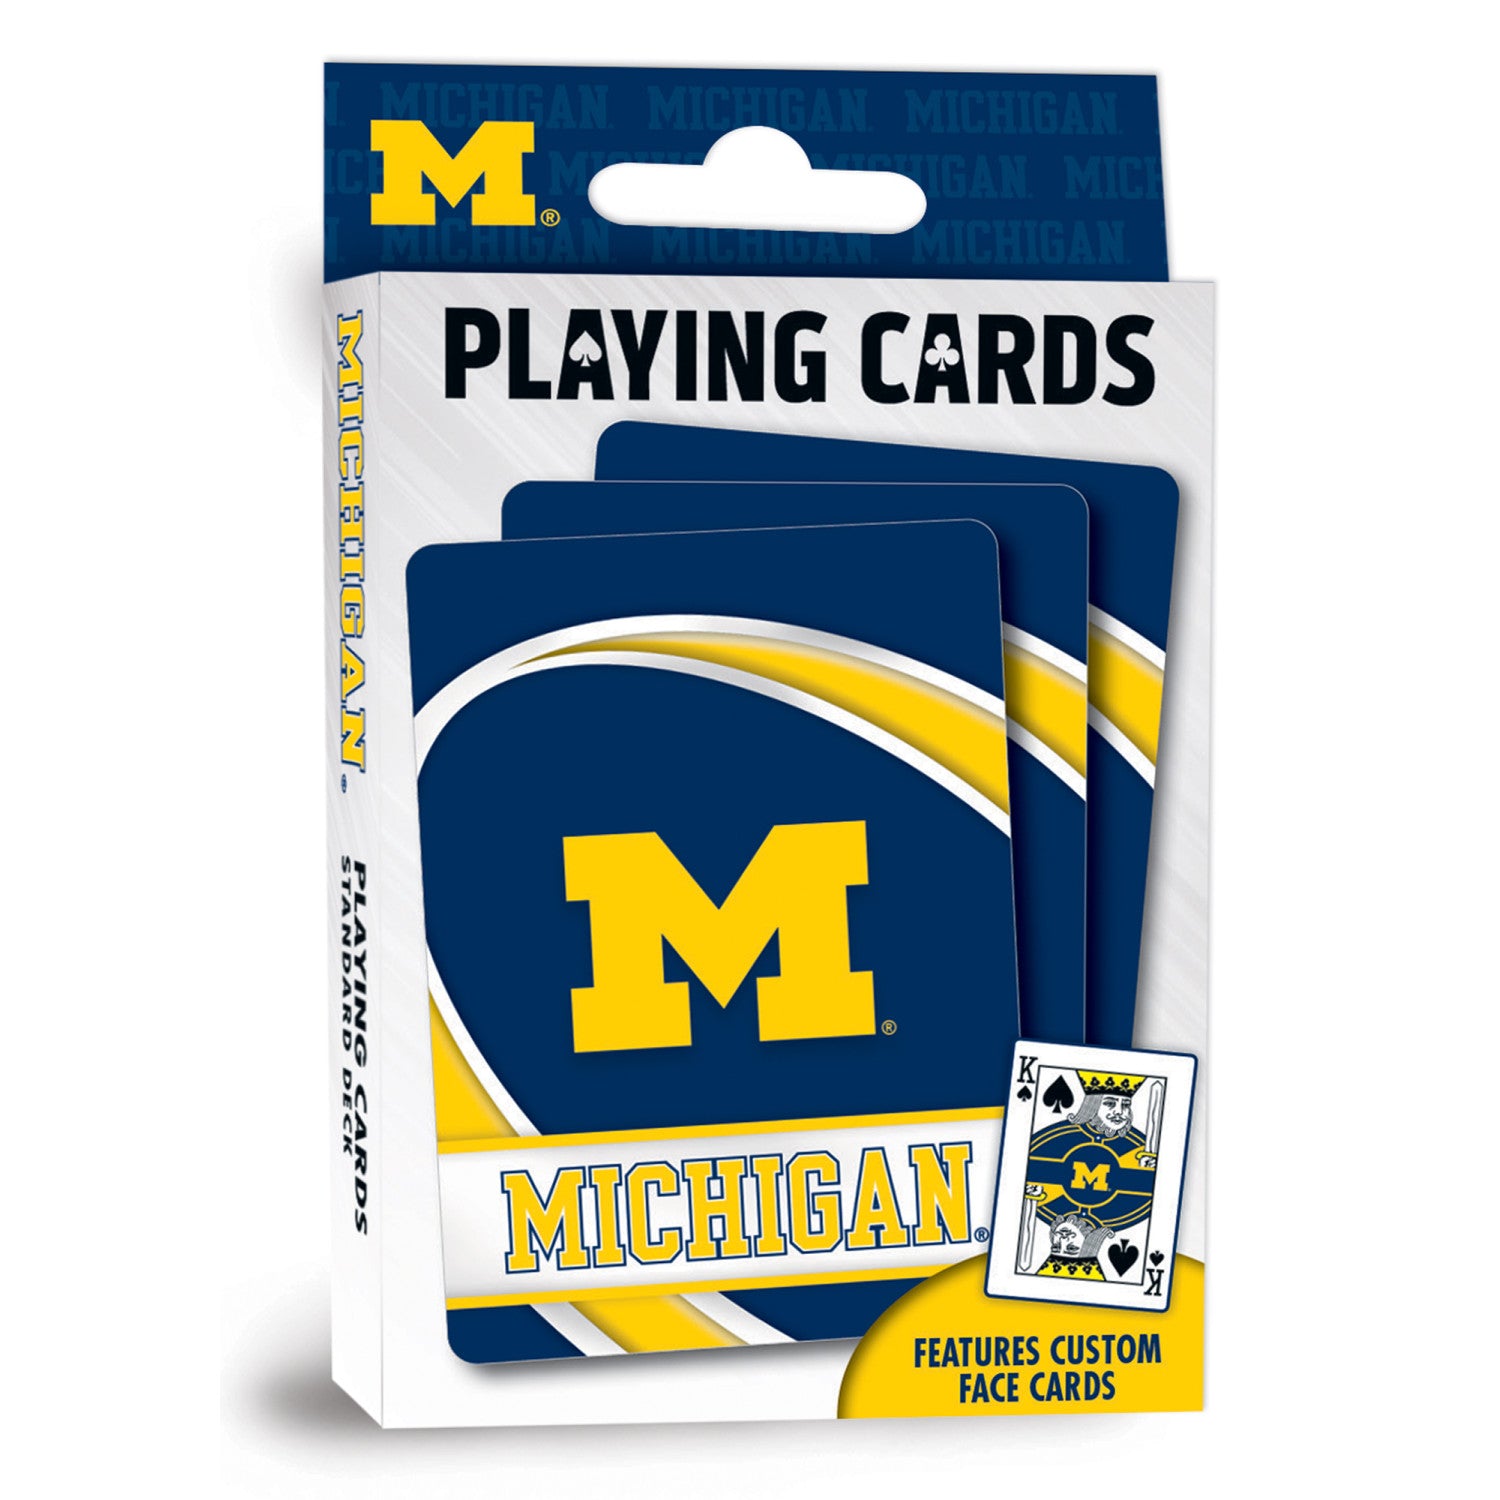 Michigan Wolverines Playing Cards - 54 Card Deck